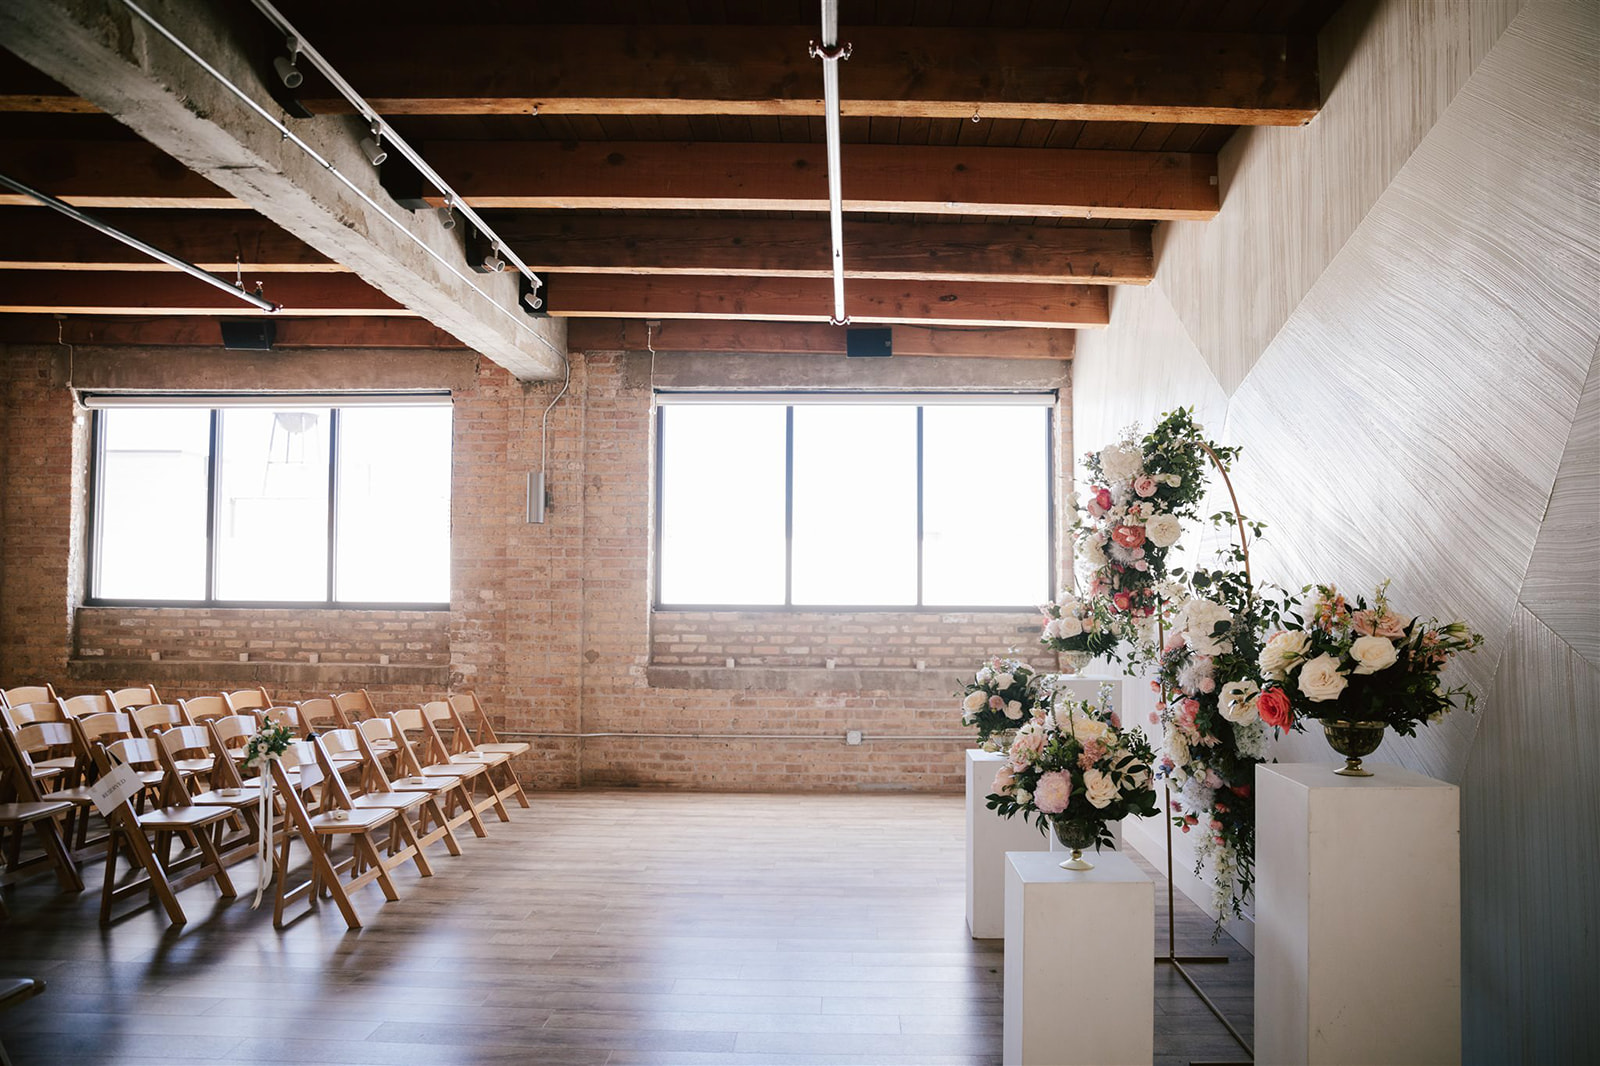 At Walden Chicago, vibrant blooms in shades of peach, coral, and white adorn the wedding venue, adding a burst of color.